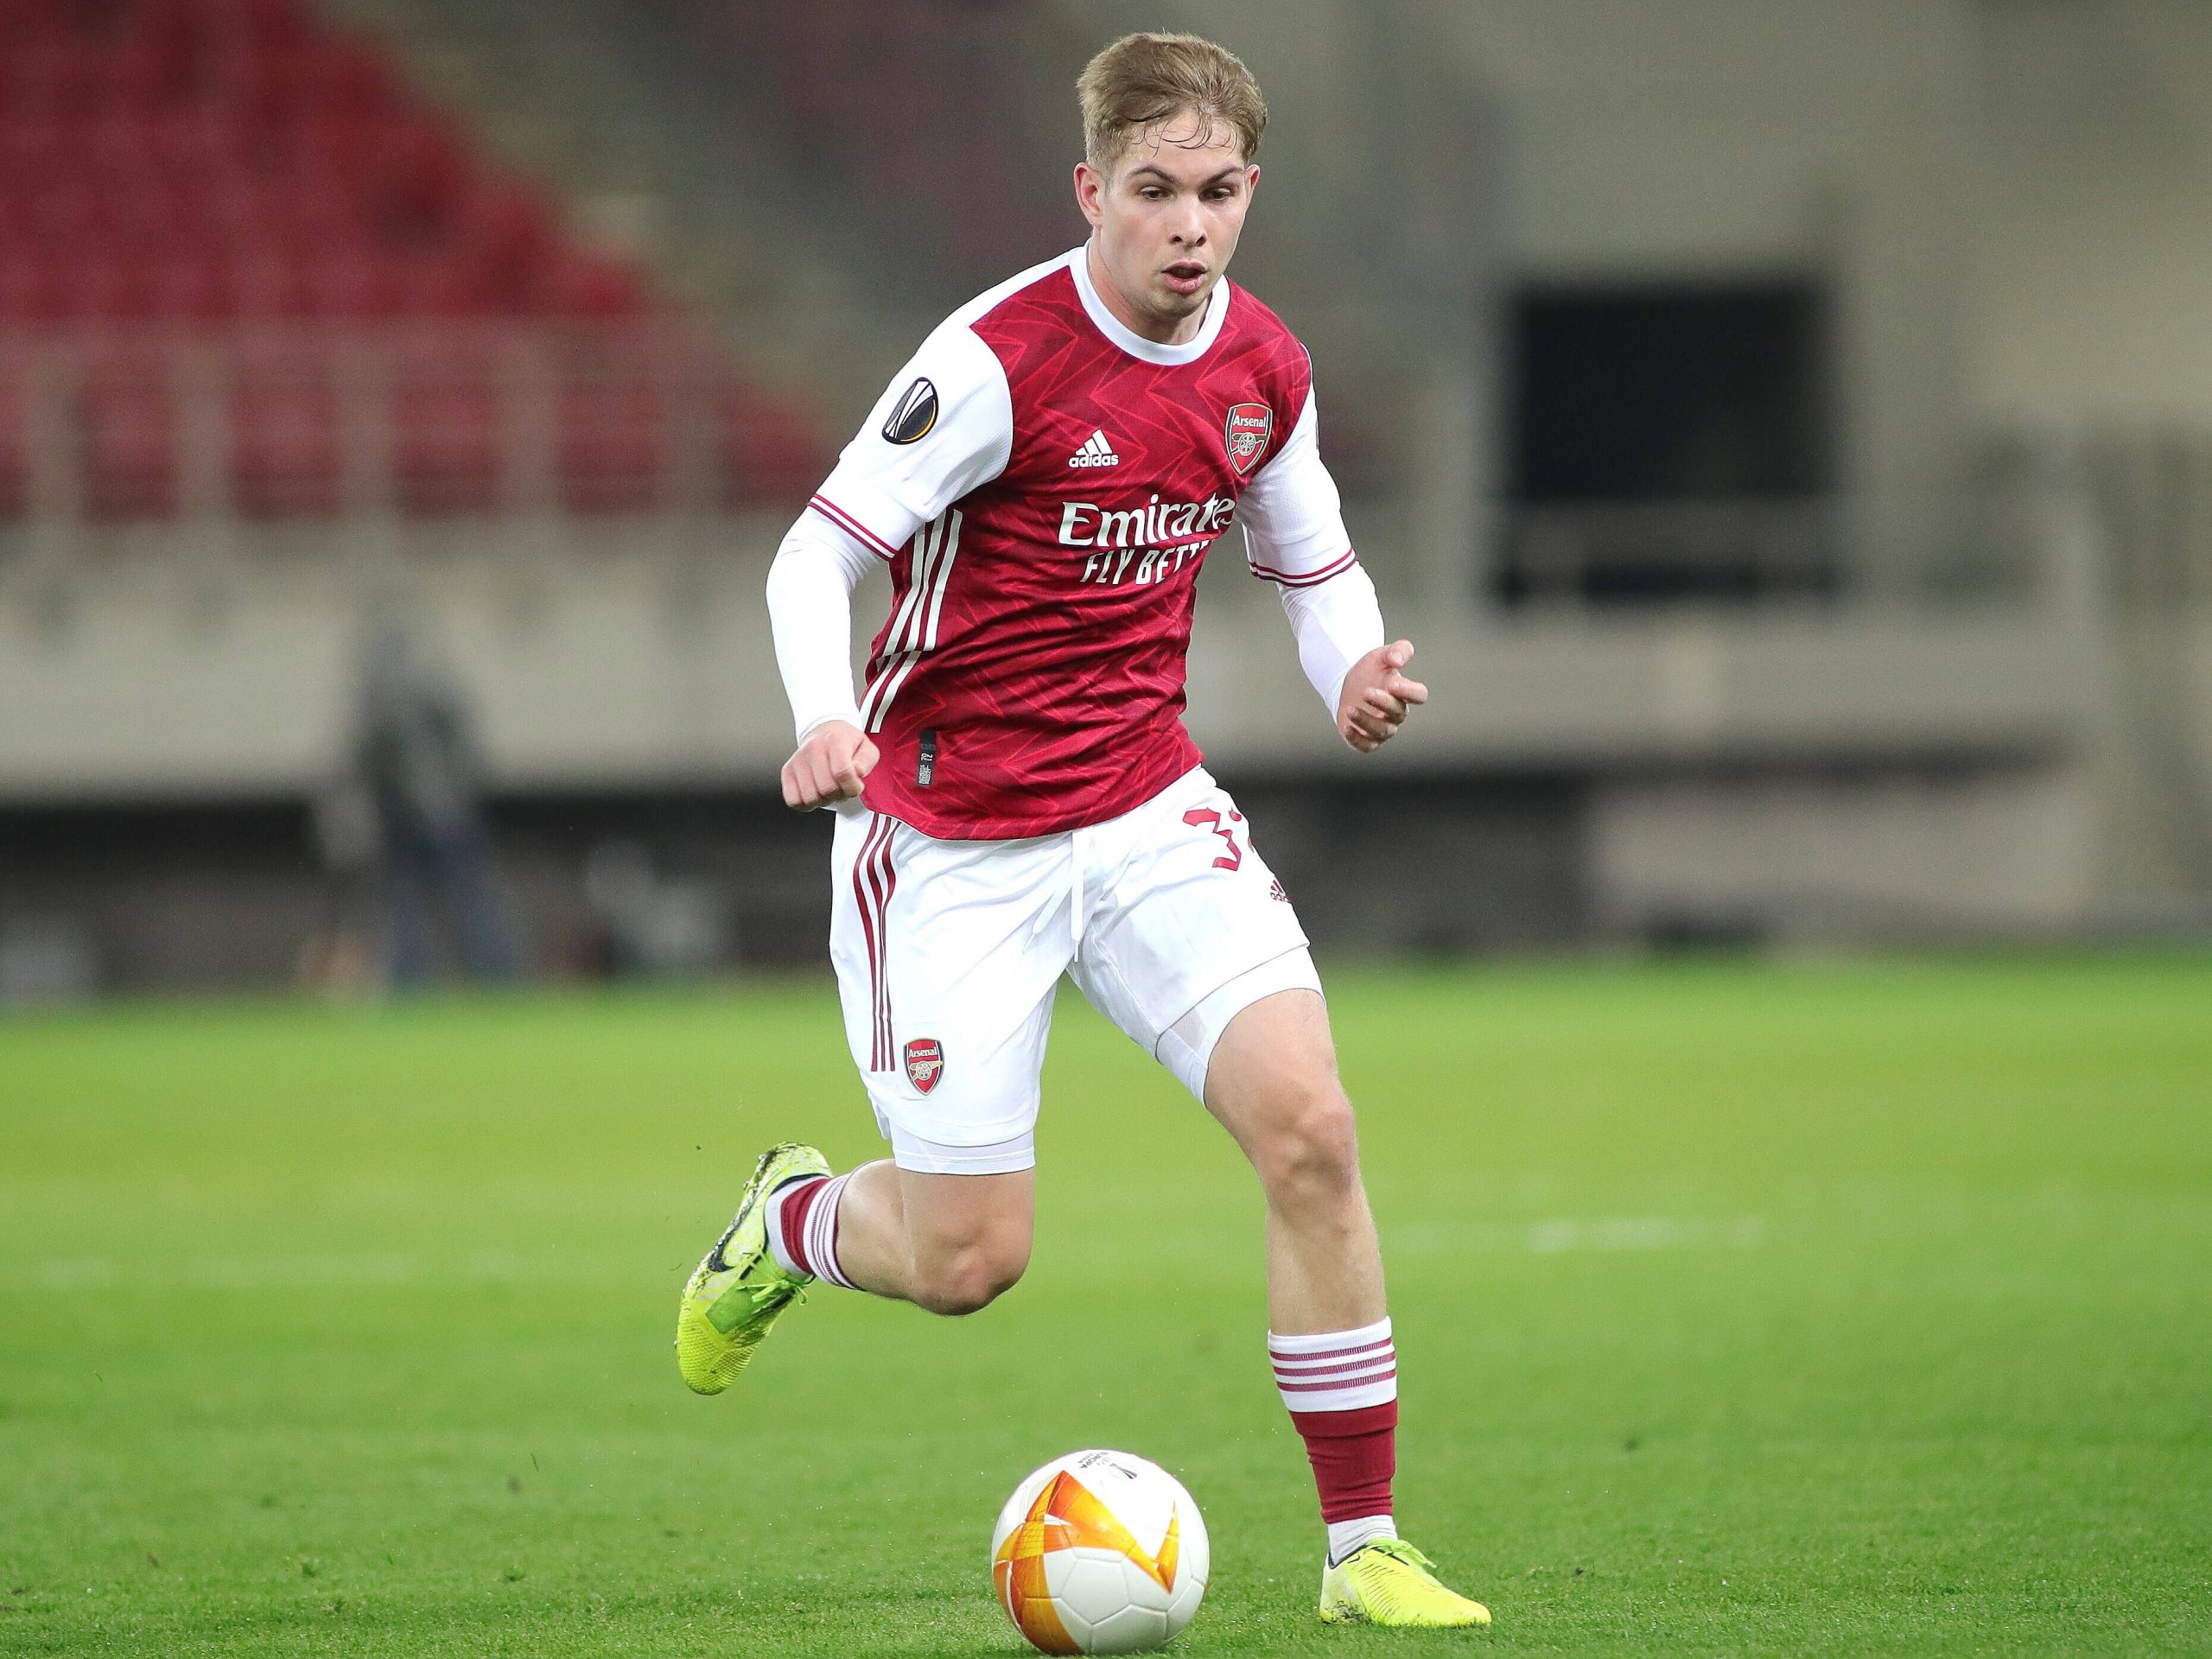 Emile Smith Rowe revealed that he turned down a transfer to Tottenham Hotspur for a move to Arsenal.